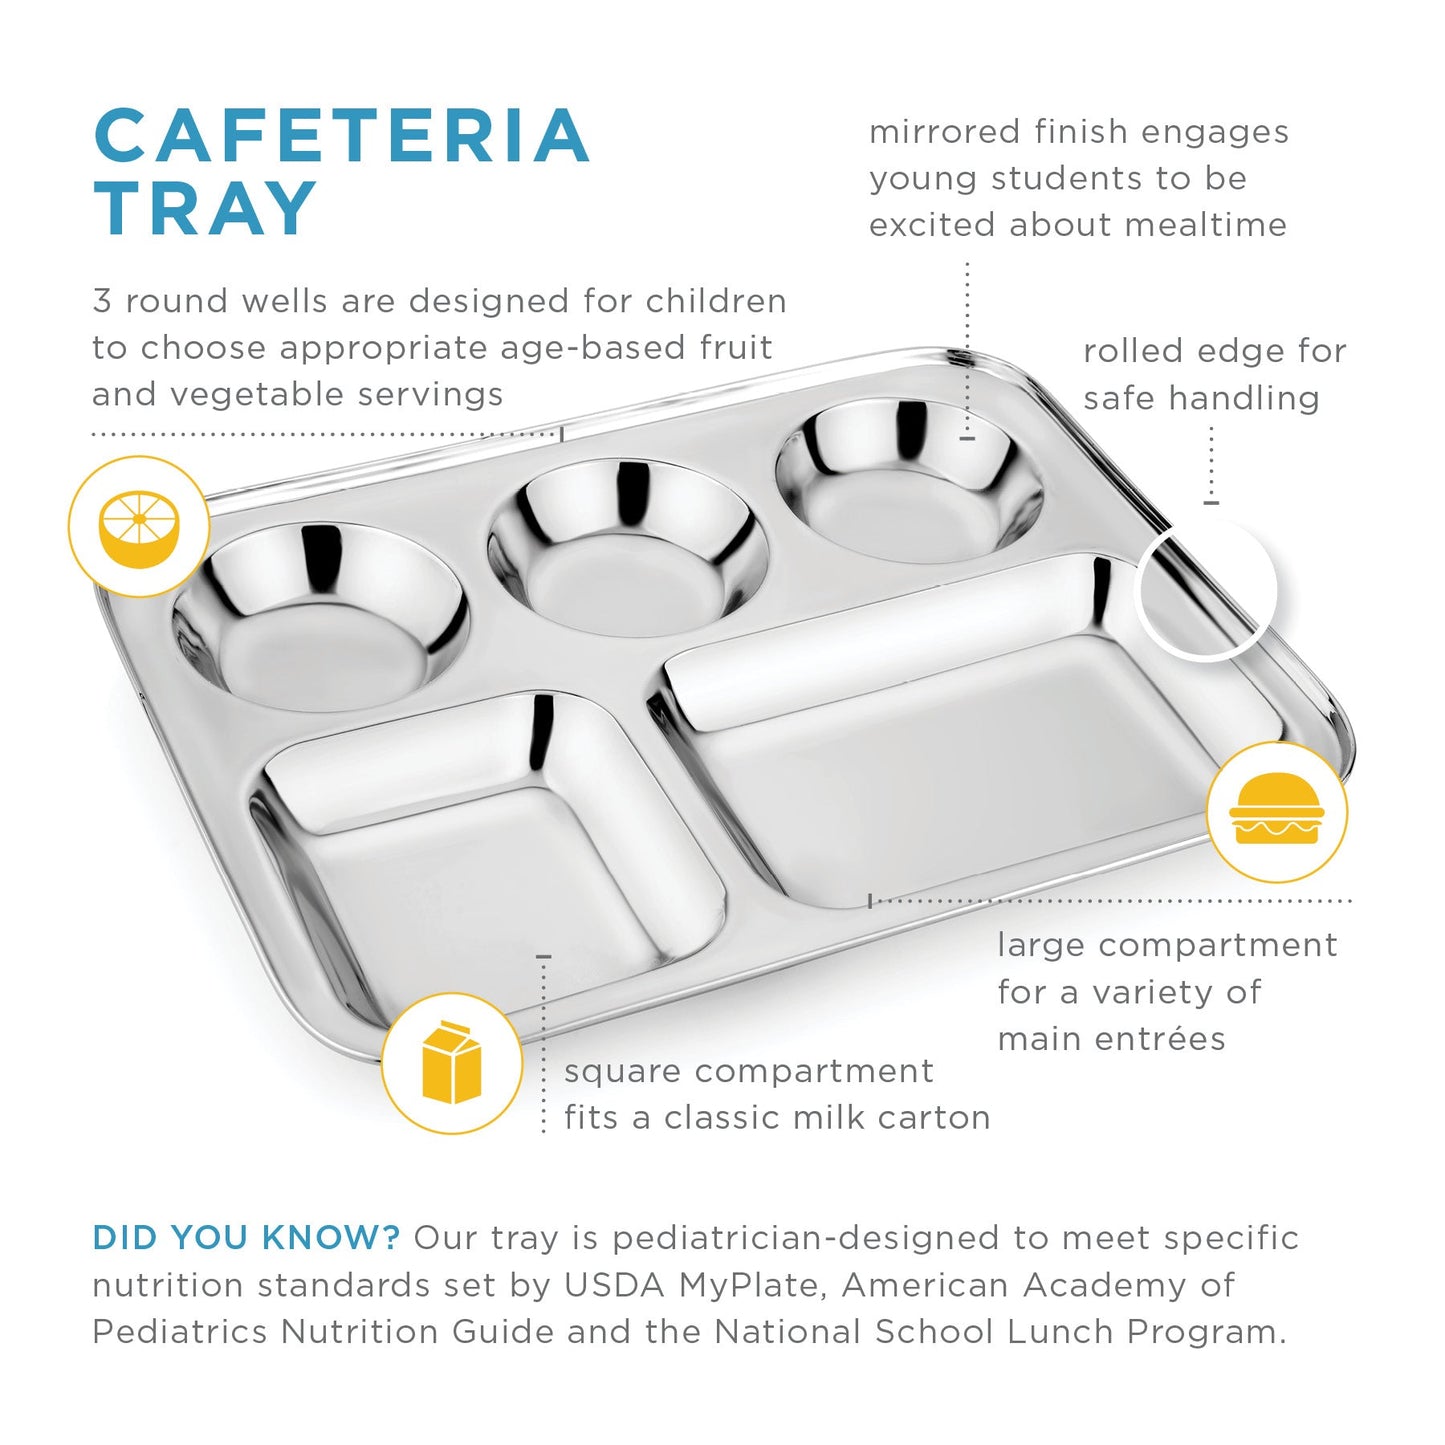 Zero waste foodware, stainless steel cafeteria trays with 3 round wells designed for children to choose appropriate age-based fruit and vegetable servings, mirrored finish engages young students, rolled edge for safe handling, large compartment for a variety of main entrees, square compartment fits a classic milk, our trays are pediatrician designed to meet specific nutrition standards set by the USDA MyPlate, American Academy of Pediatrics and the National Lunch Program.